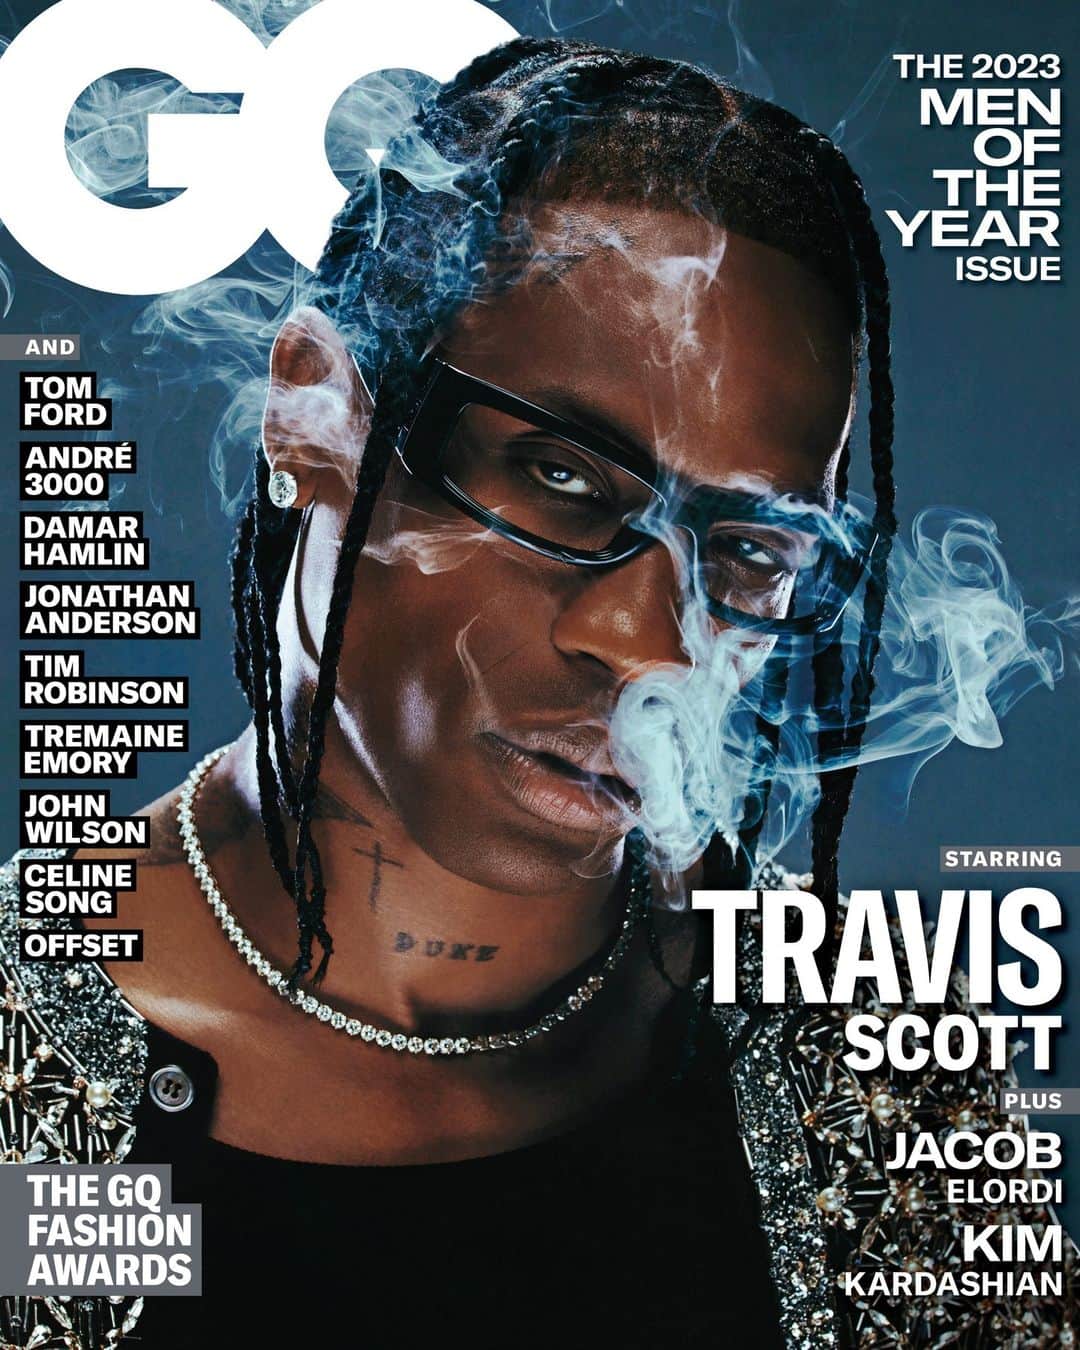 GQのインスタグラム：「Presenting our next #GQMOTY cover star: Travis Scott.  This year, @travisscott bounced back into the spotlight with the summer’s biggest album and a mega-tour to match. And yet, he’s still striving for something even grander.   For GQ’s Men of the Year issue, we hit the road with one of the most dynamic entertainers of our time as he opens up about edging back into the world, finding balance in “Utopia,” and how his daughter Stormi helped inspire his latest album.  Written by Chris Heath Photography by @jack_bridgland_studio Styled by @mobolajidawodu Produced by Patrick Mapel @campproductions Hair by Yazmin Adam Barber Ian Owens Skin by @heeezooo  SFX Makeup and painting by @worshipmina  Set Design by @itsmyjello / Jones MGMT」